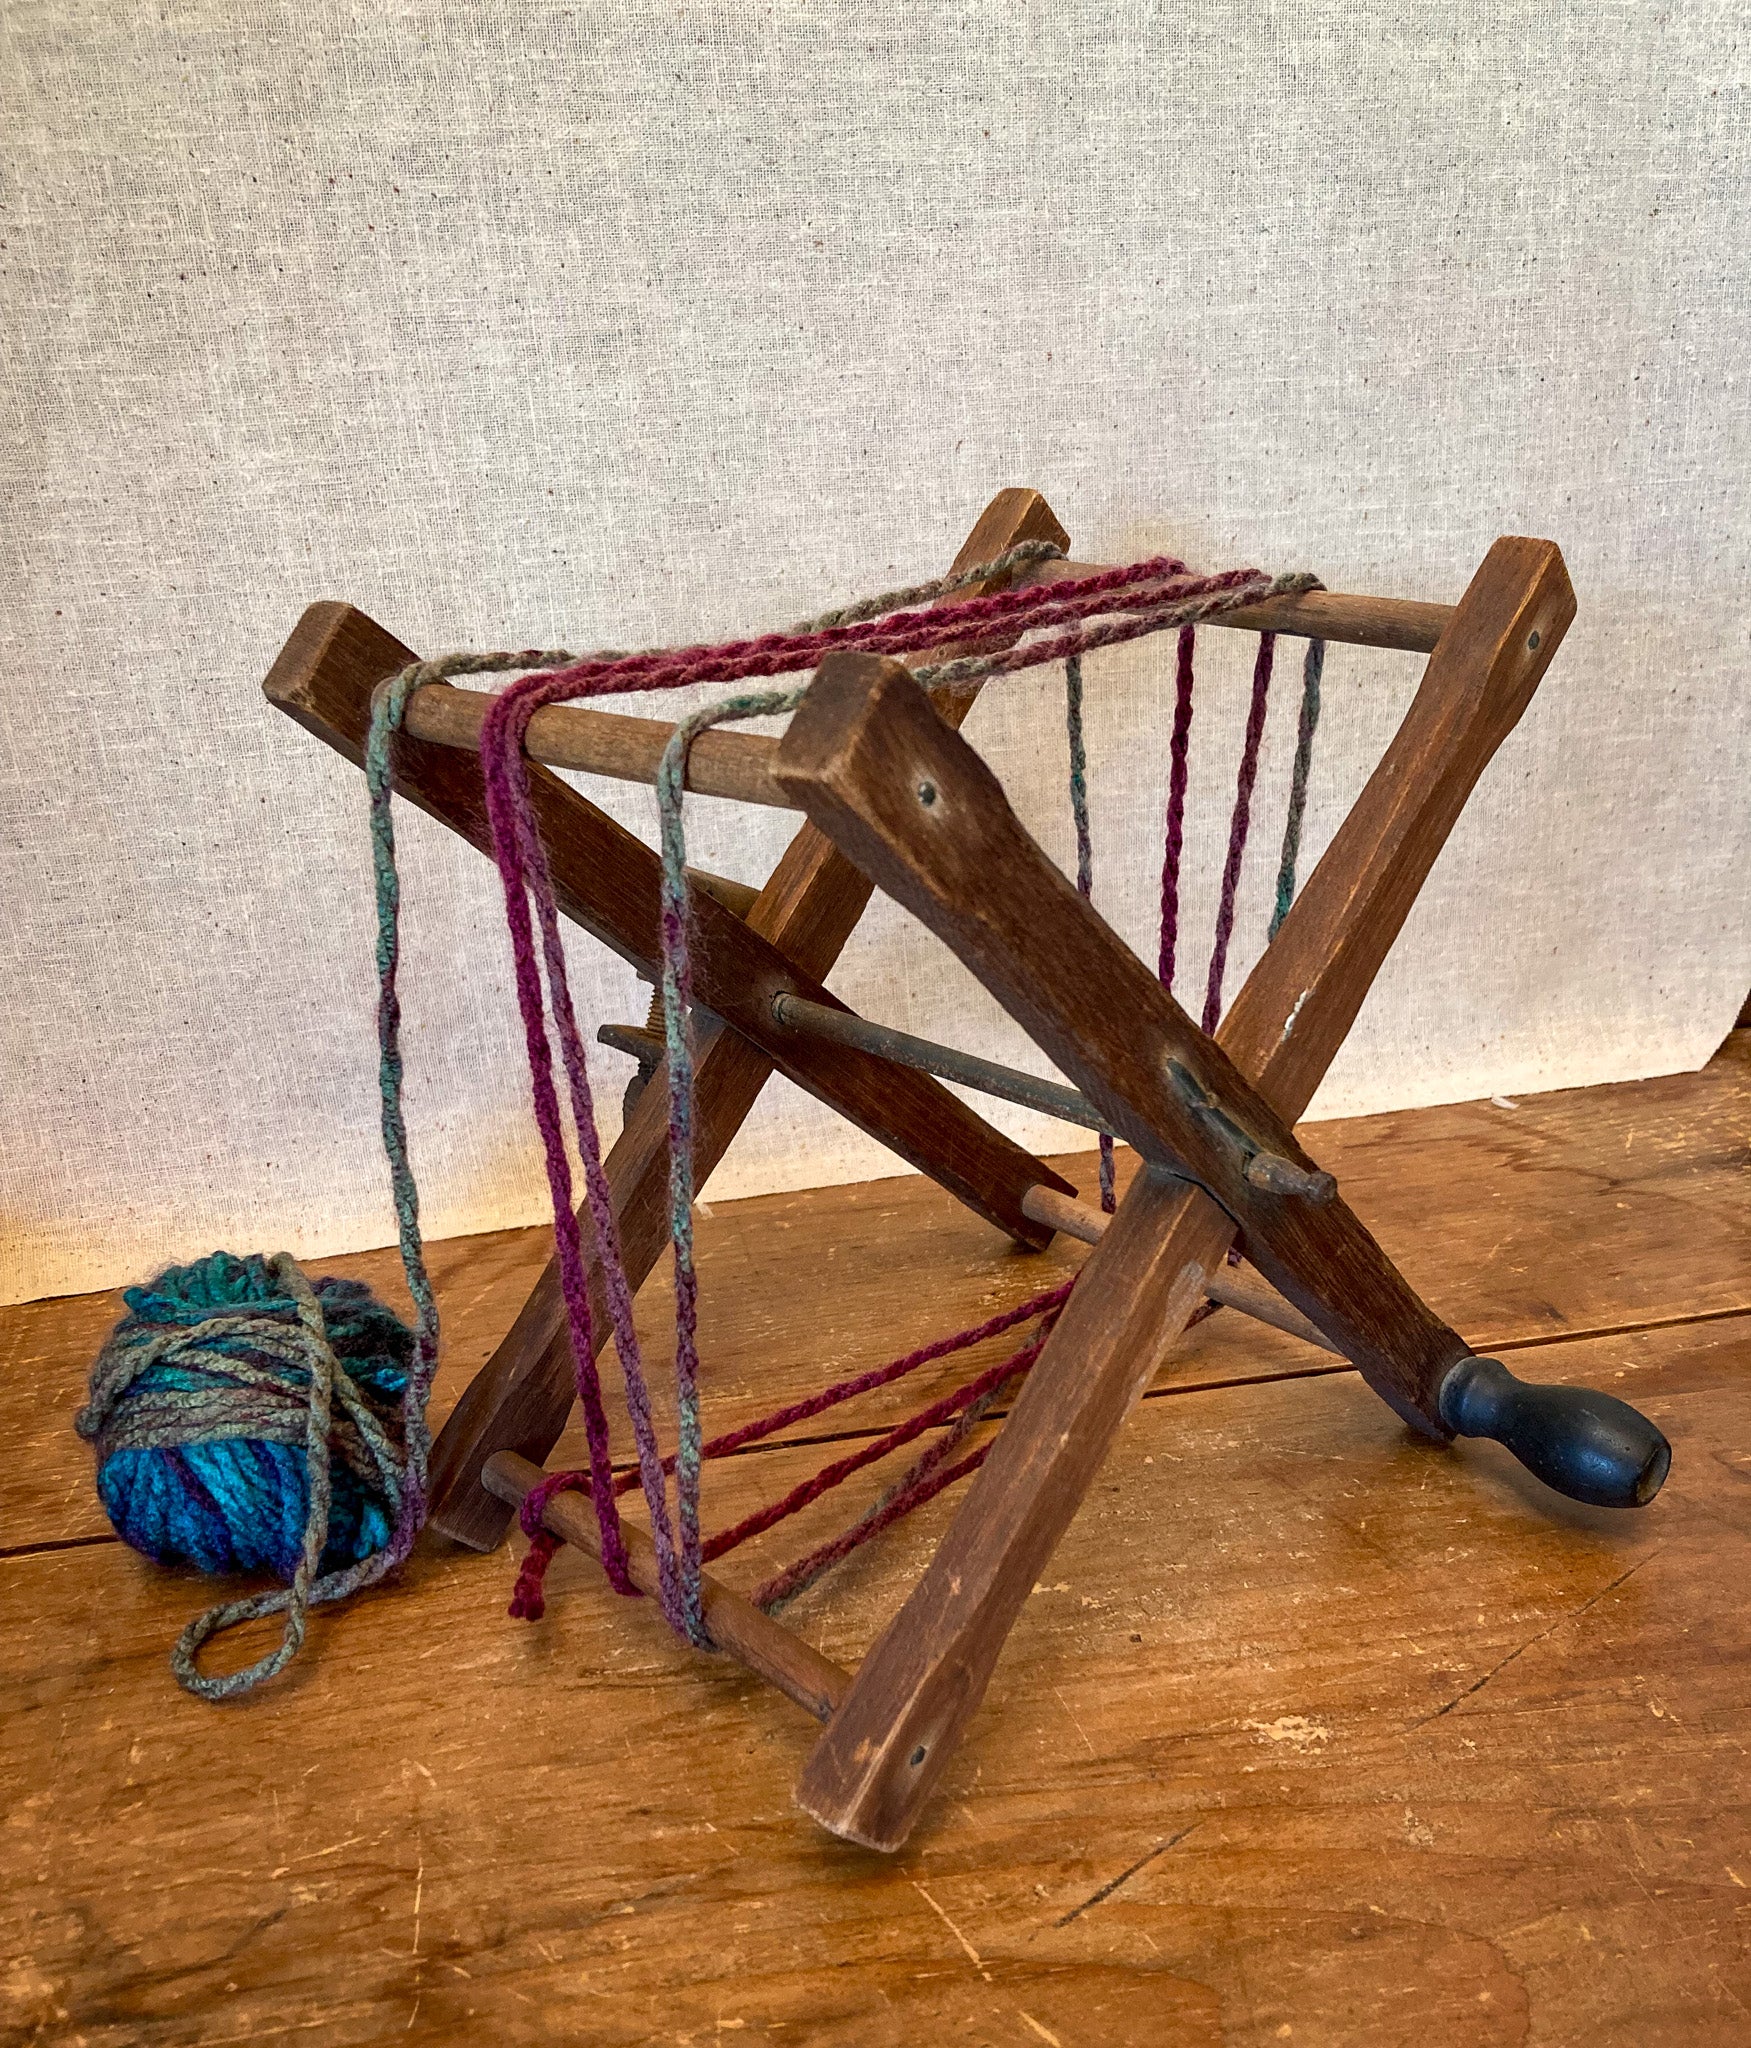 1890’s Wooden Yarn Winder with Table Clamp, Rustic and Homemade